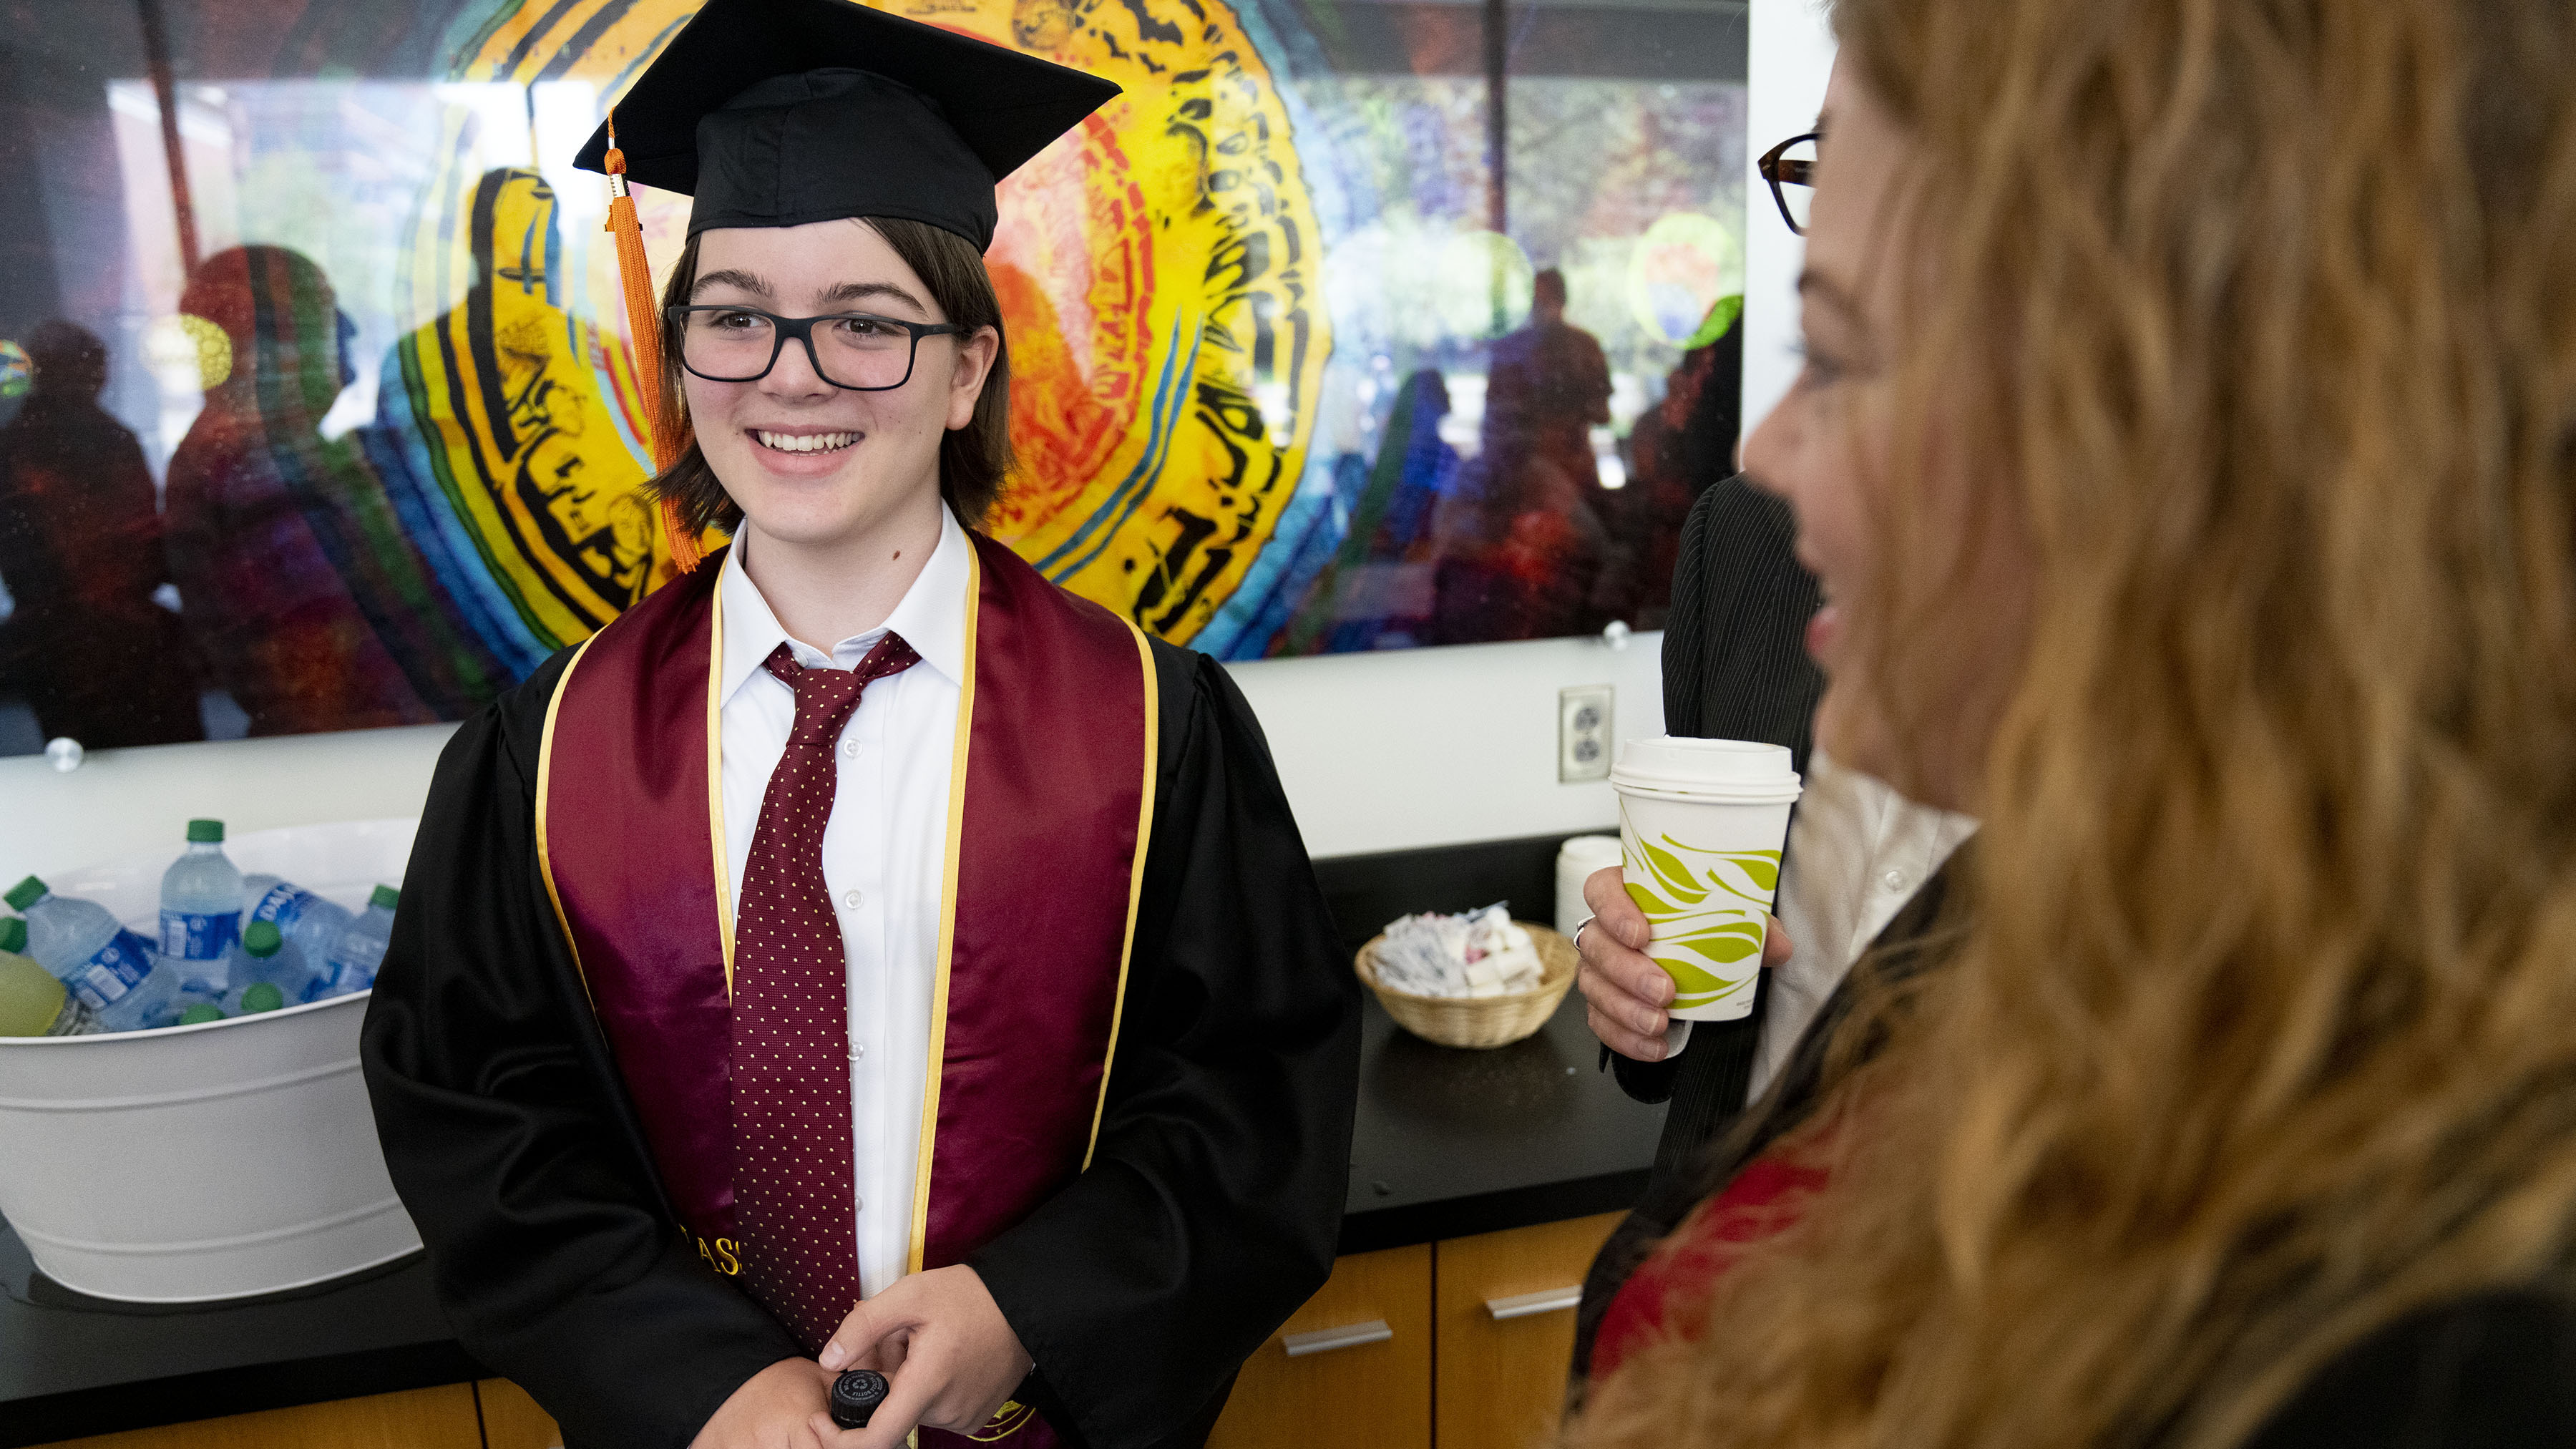 Elliott Tanner, a St. Louis Park 13-year-old, got his undergraduate degree in physics from the University of Minnesota Thursday, one of the youngest college graduates in American history. He starts post-graduate studies there in fall.